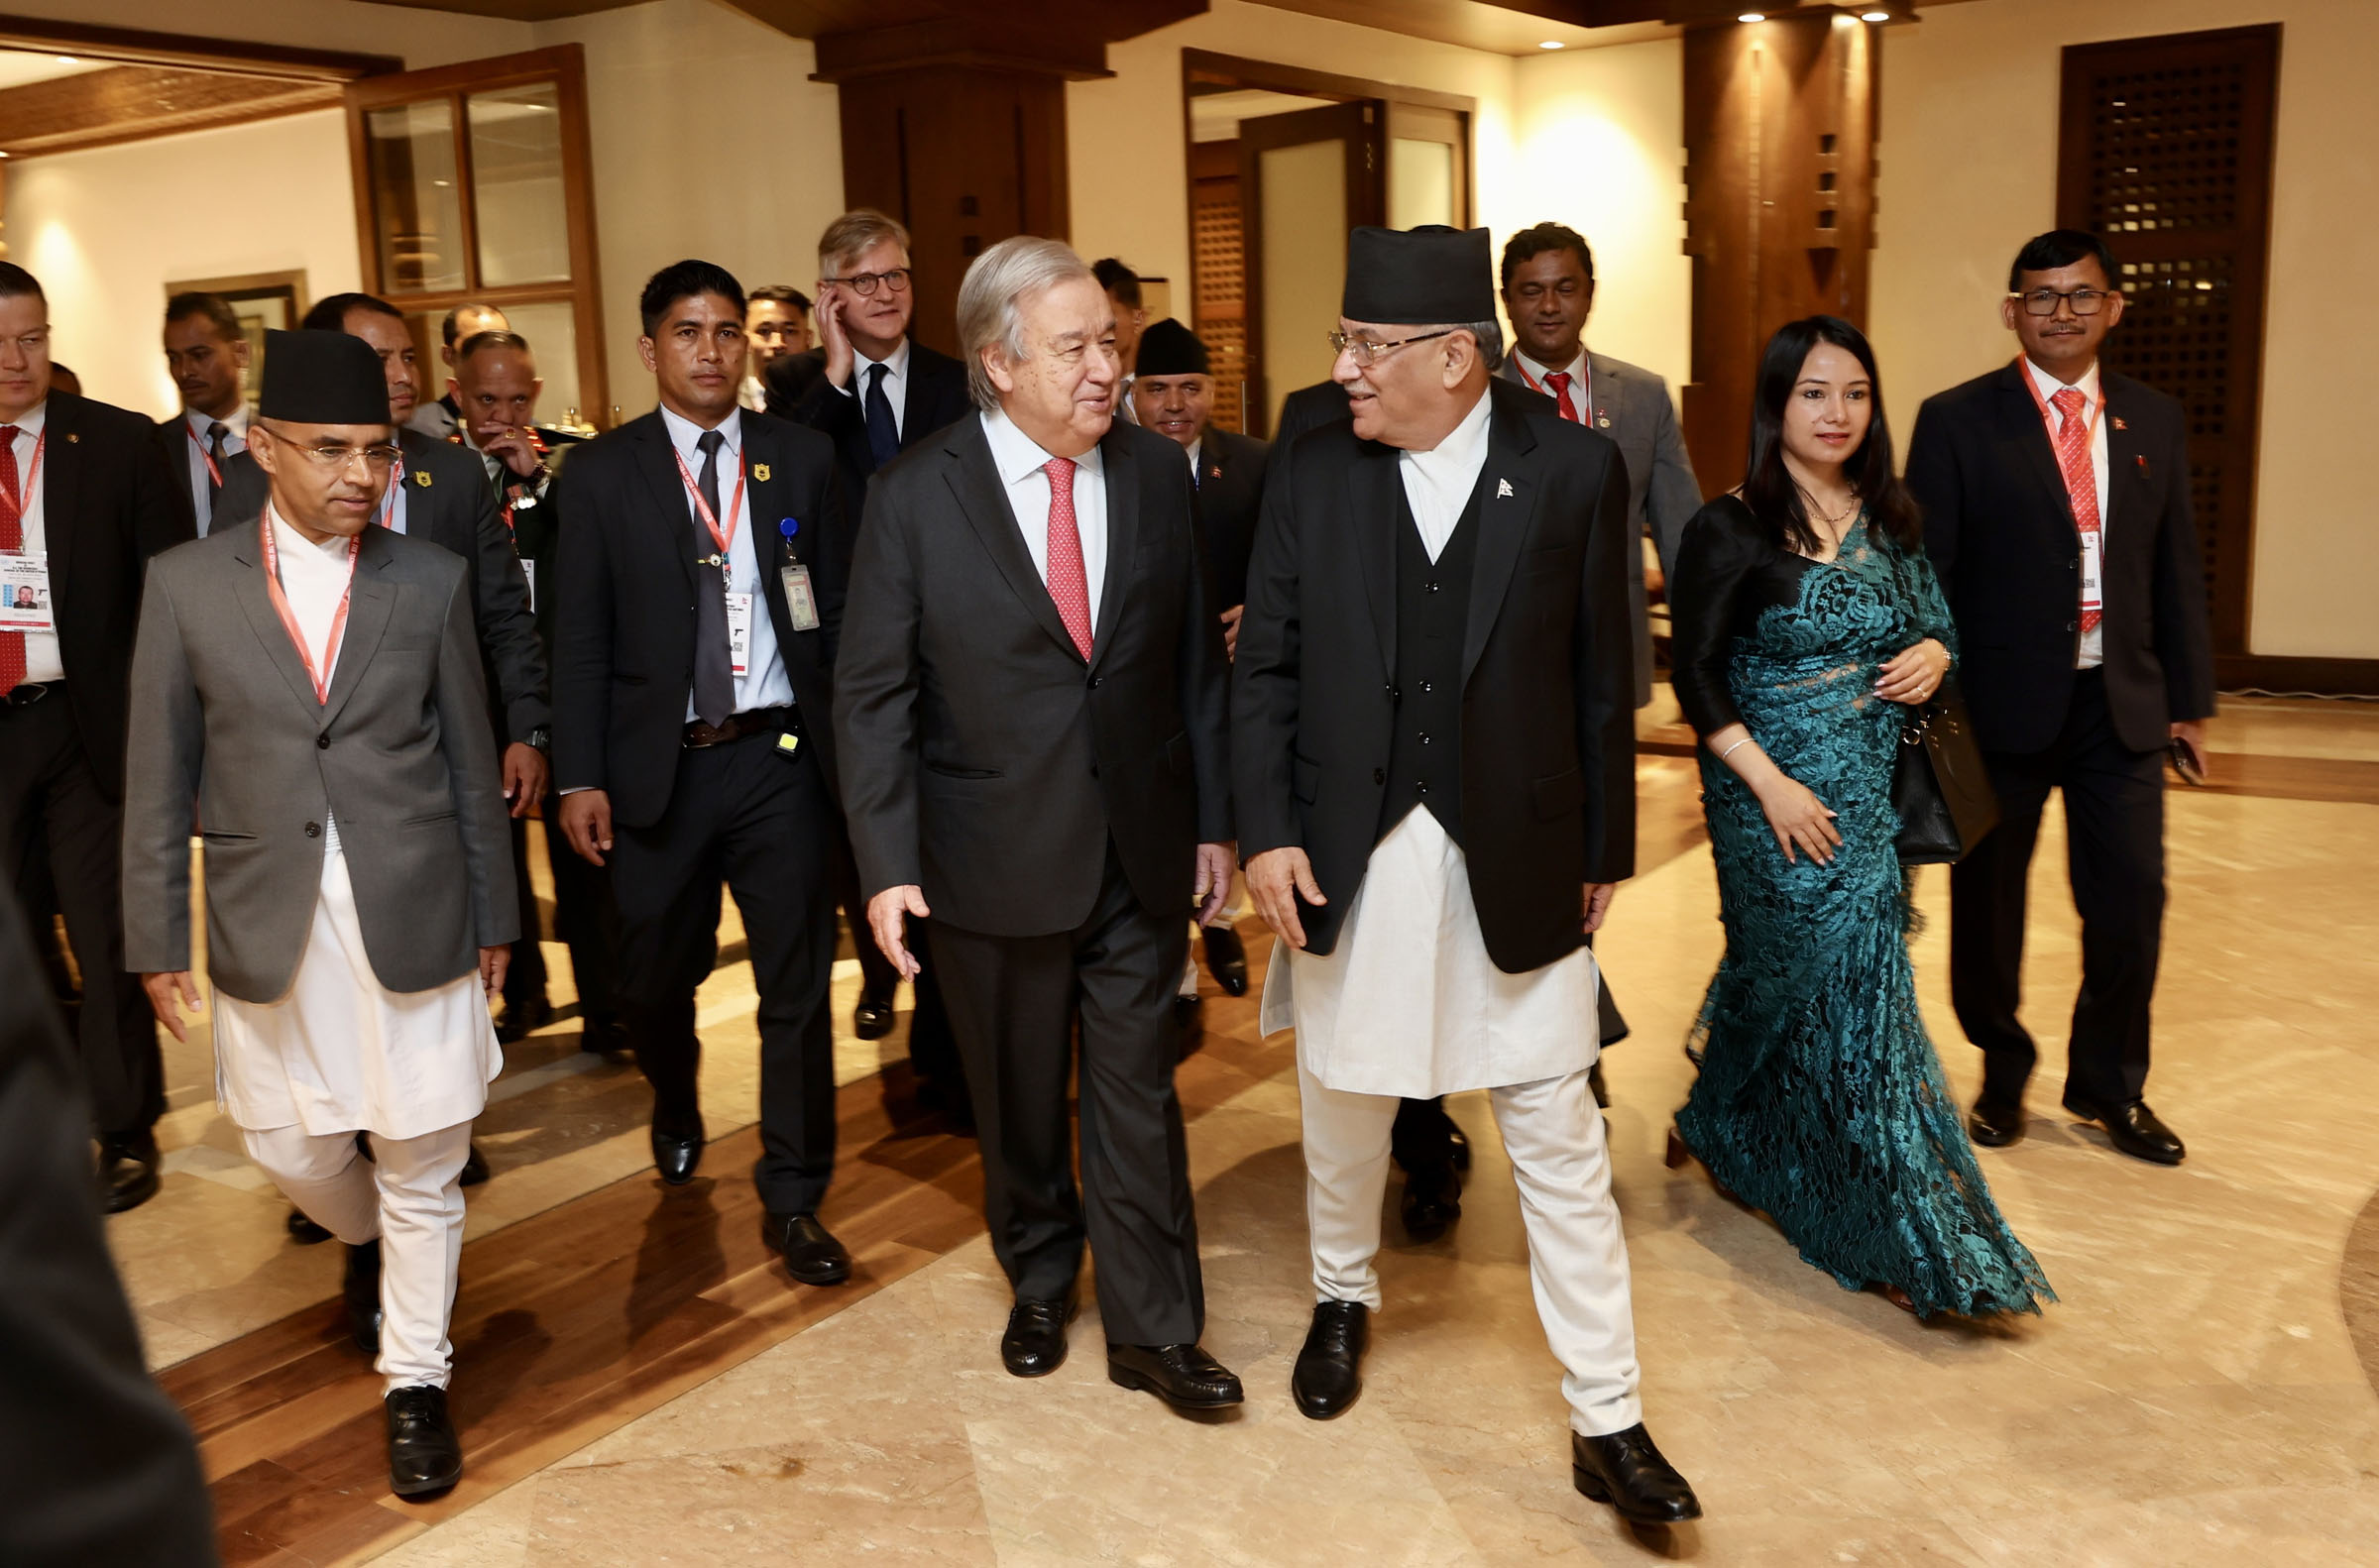 Nepal's elusive peace process and Guterres’ initiative